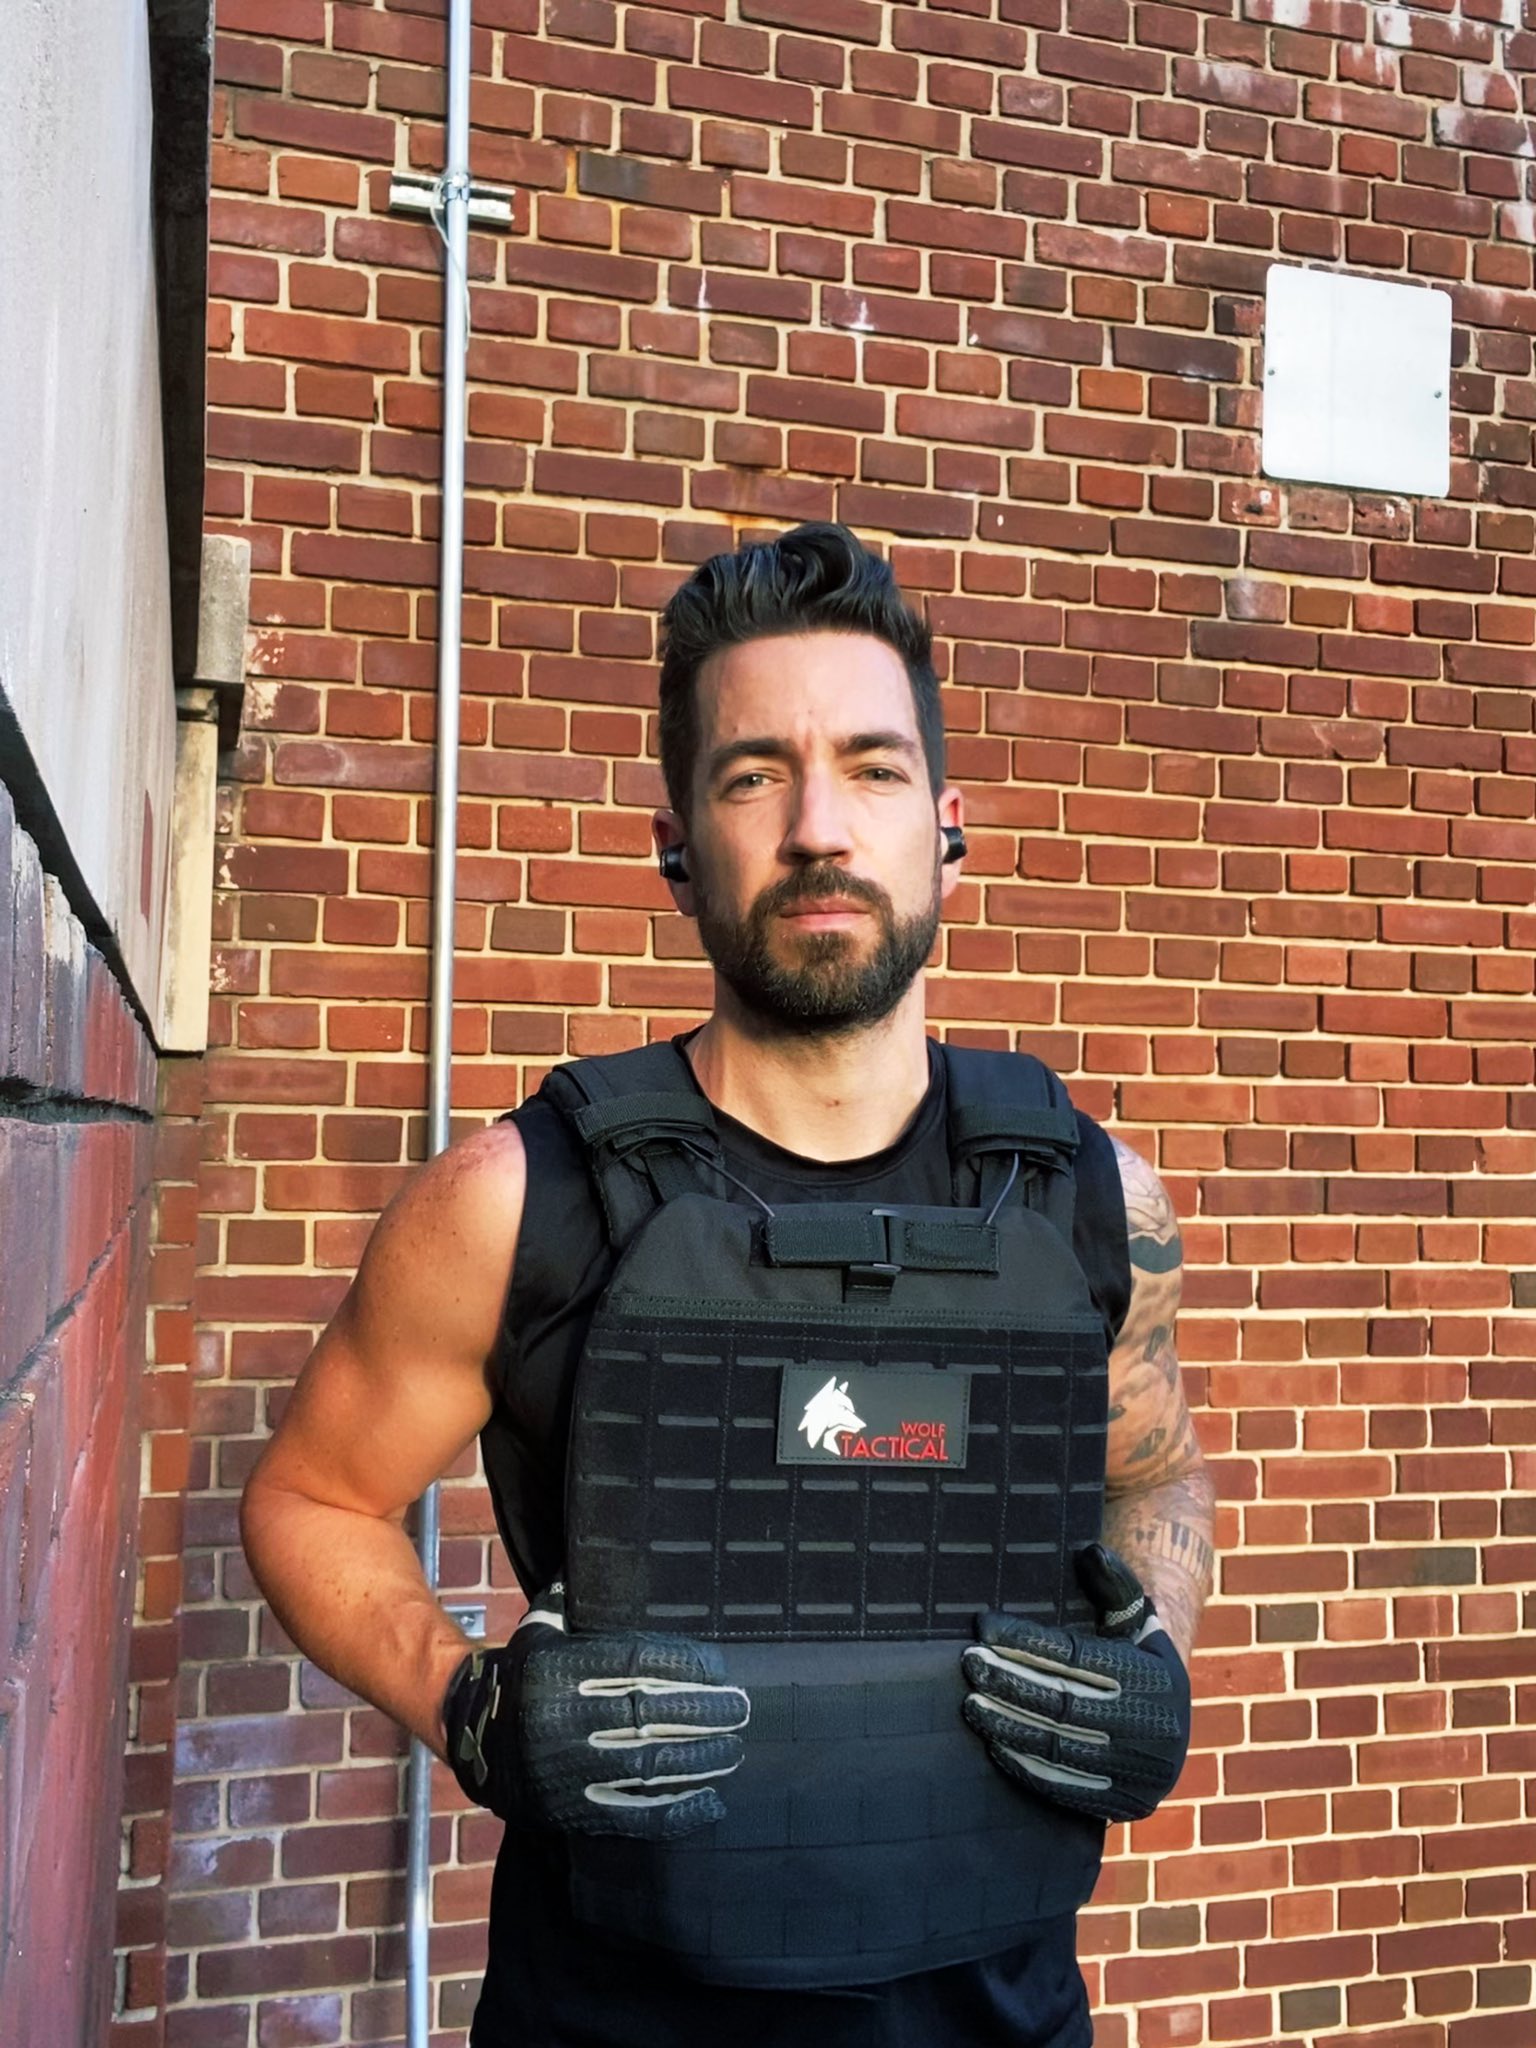 Brutal Mechanics En effektiv Charles Thorp on Twitter: "Running the @MurphChallenge all weekend, new  gear in from #WolfTactical. First one down. 1 mile run; 100 pull-ups; 200  push-ups; 300 squats; 1 mile run (with 20 lb